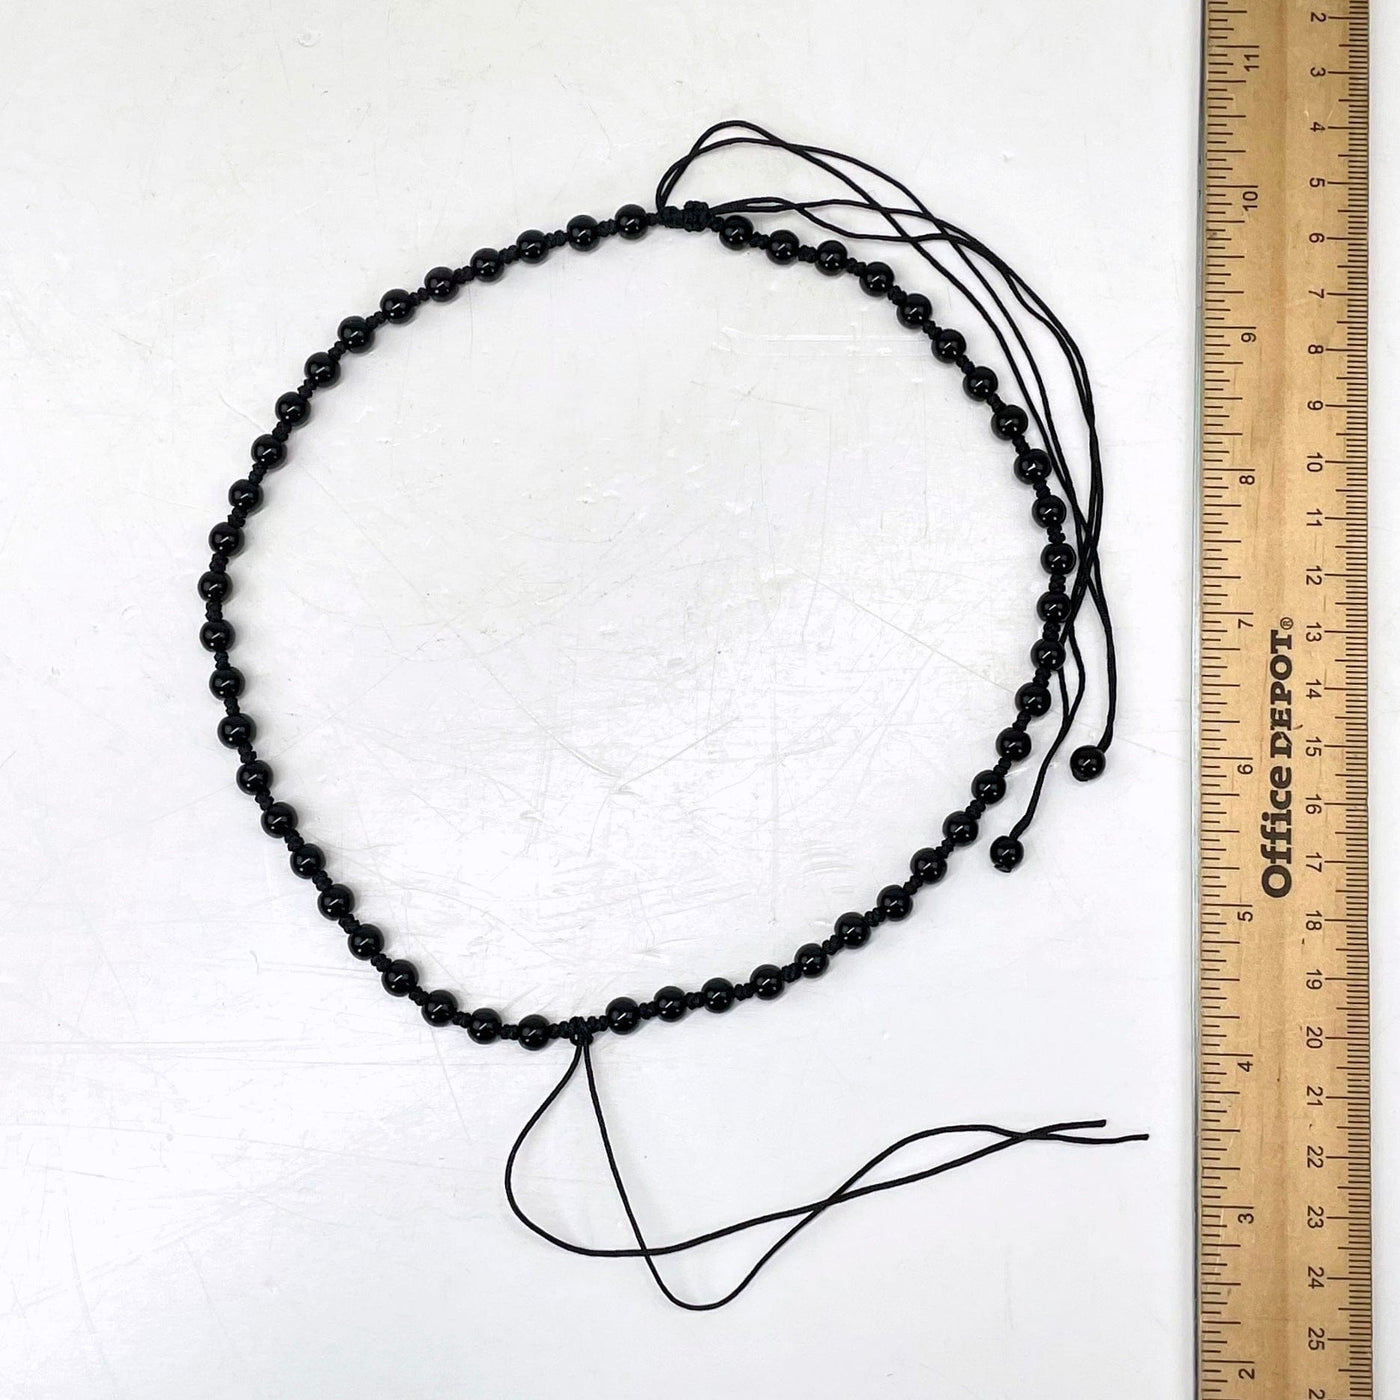 shortest necklace length with ruler for size reference